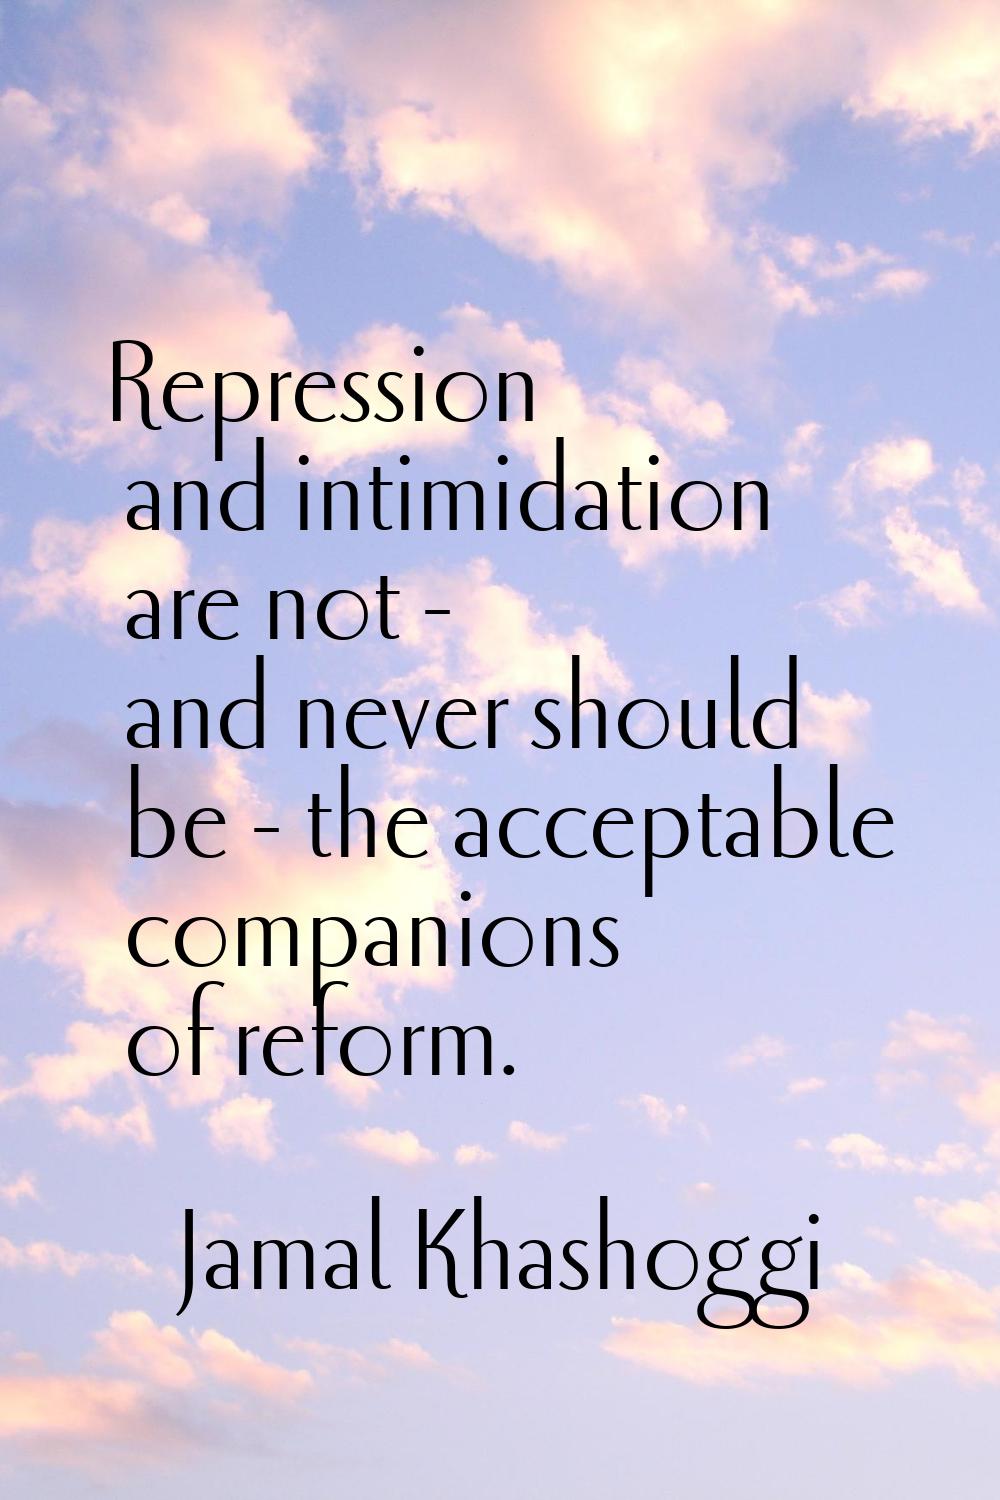 Repression and intimidation are not - and never should be - the acceptable companions of reform.